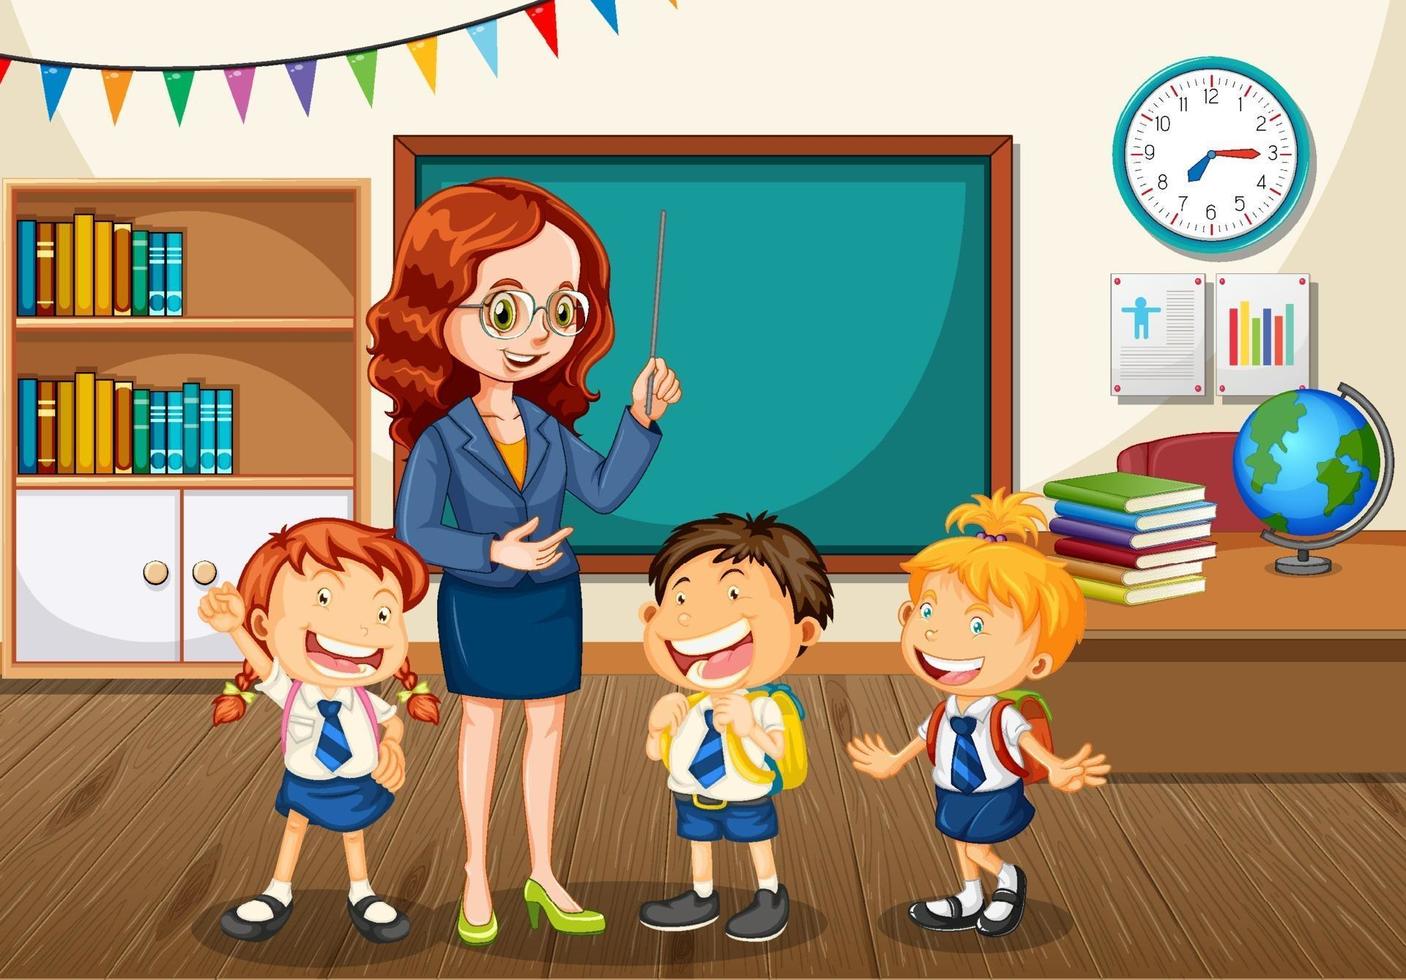 Teacher talking with students in the classroom scene vector